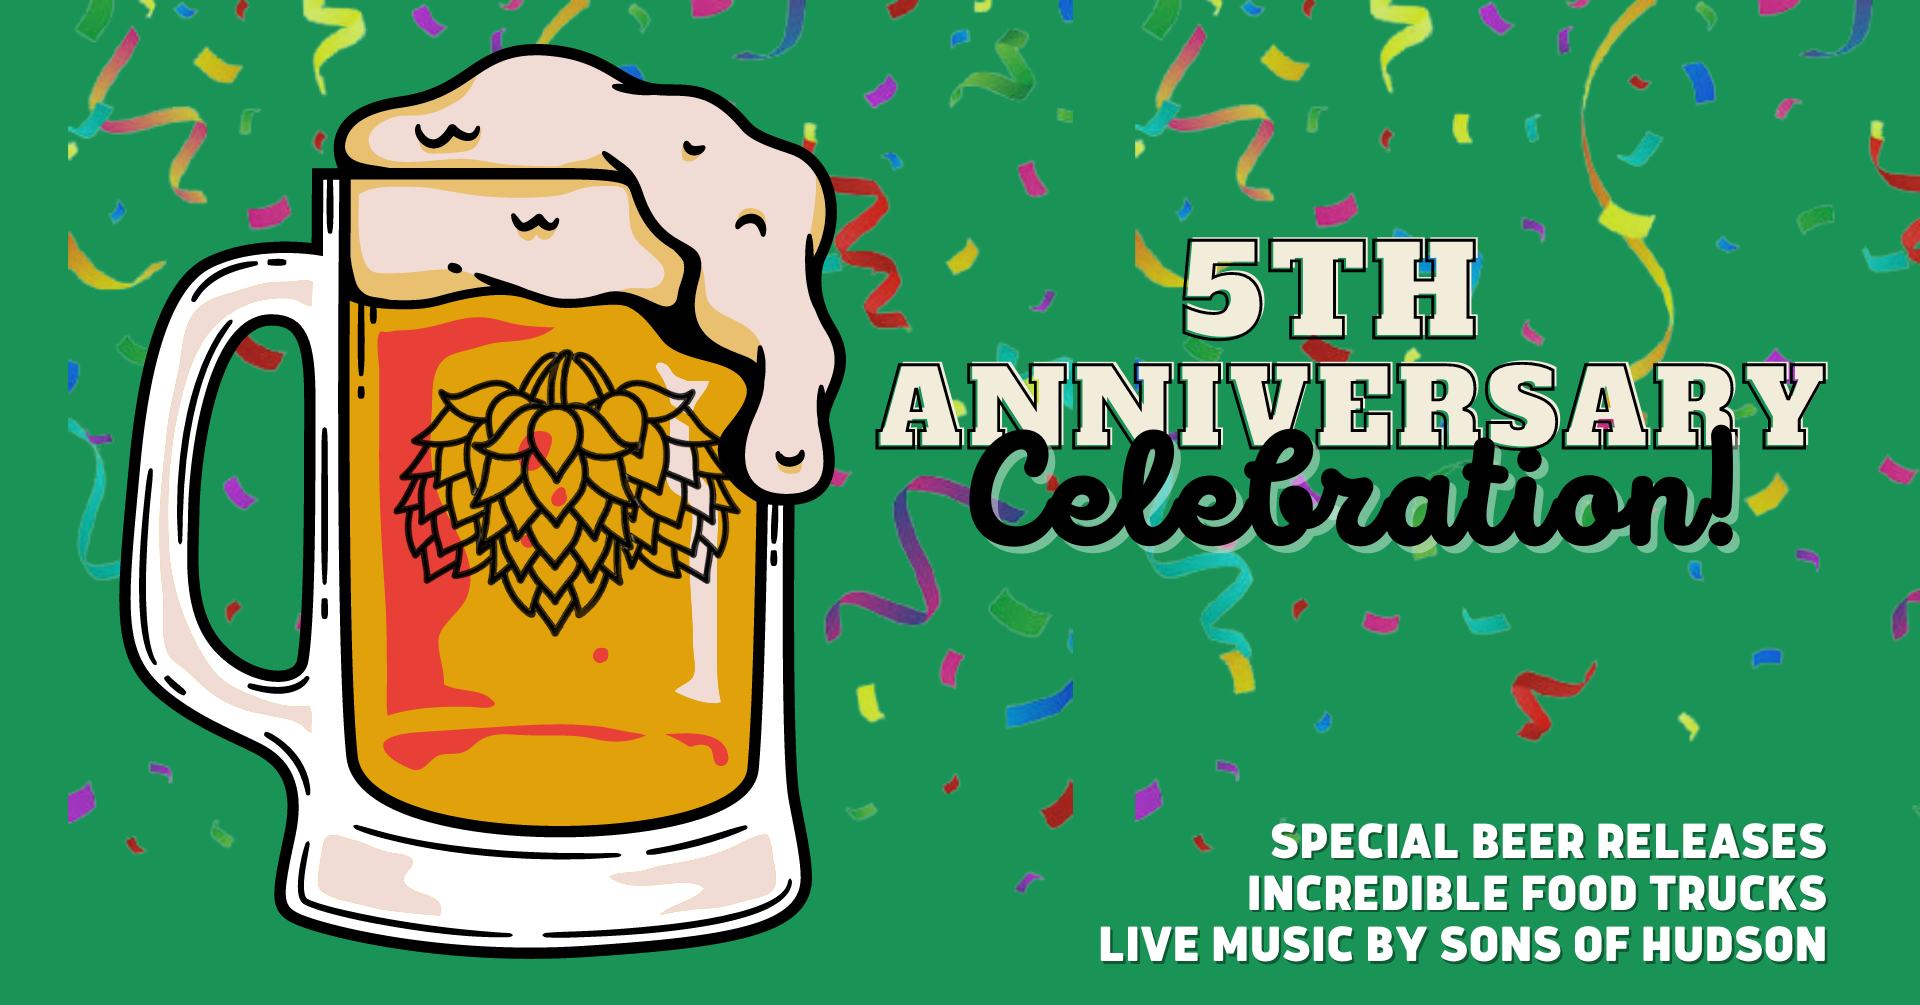 Long Lot Brewery's 5th Anniversary Celebration